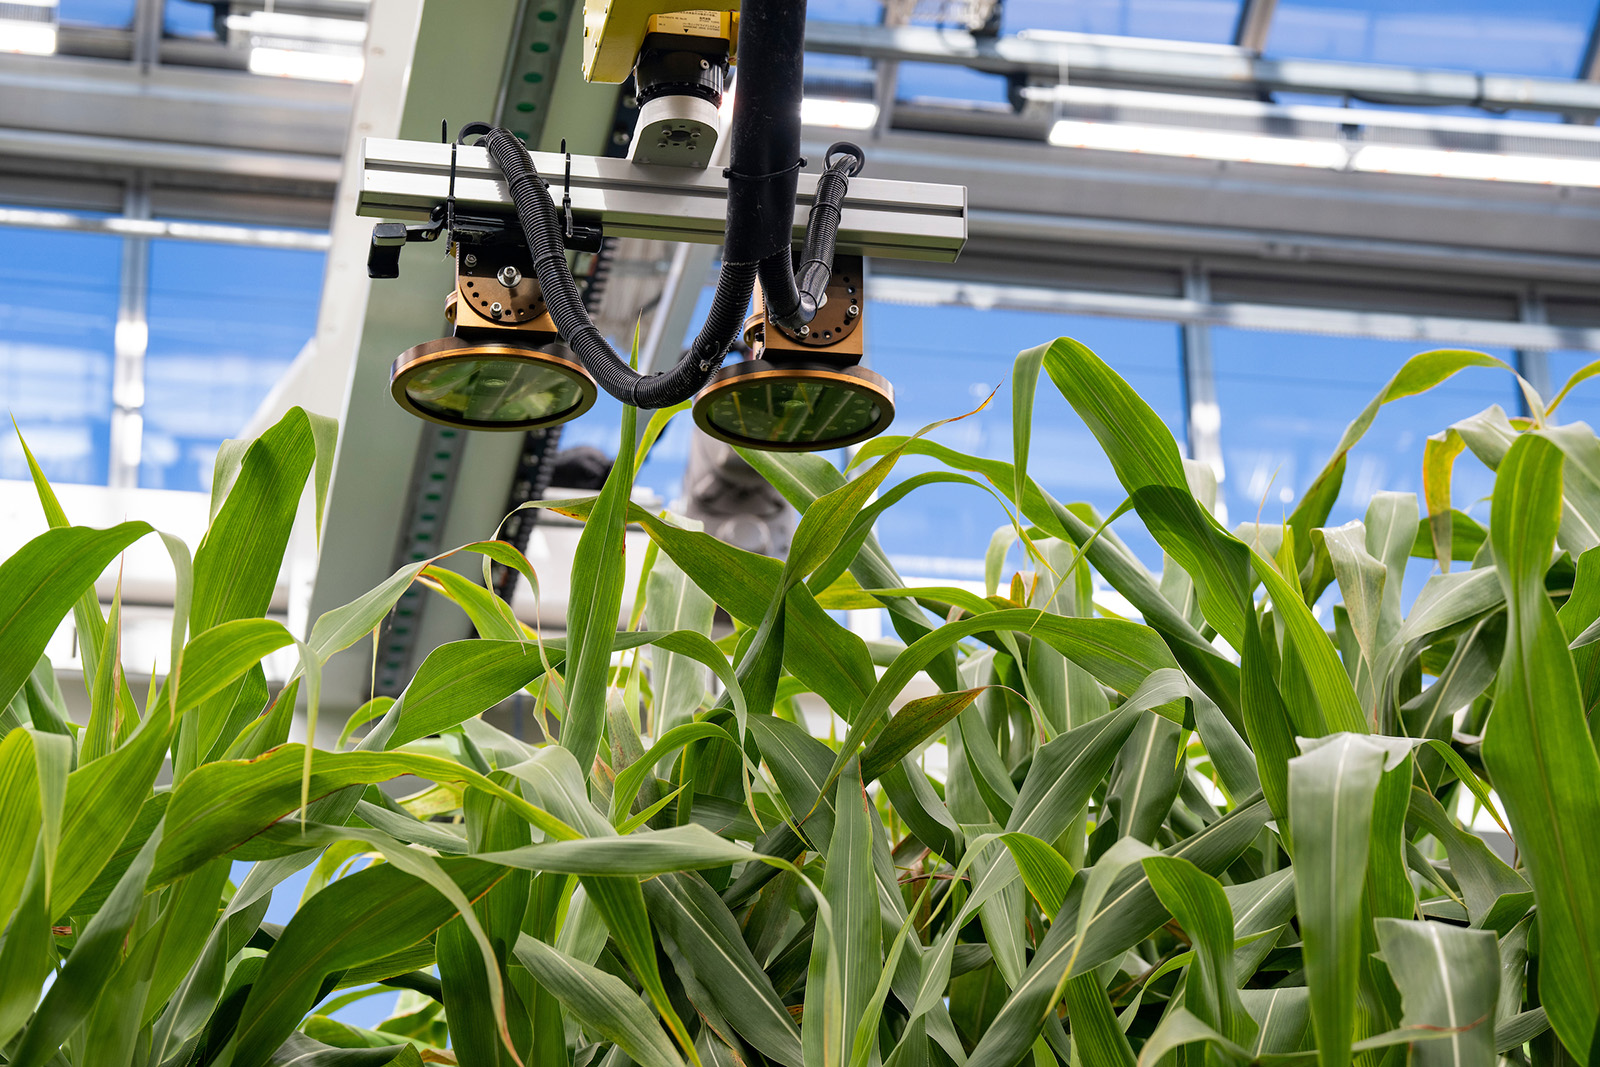 Close-up shot of sensors on track hovering over the tops of corn stalks in a glass greenhouse